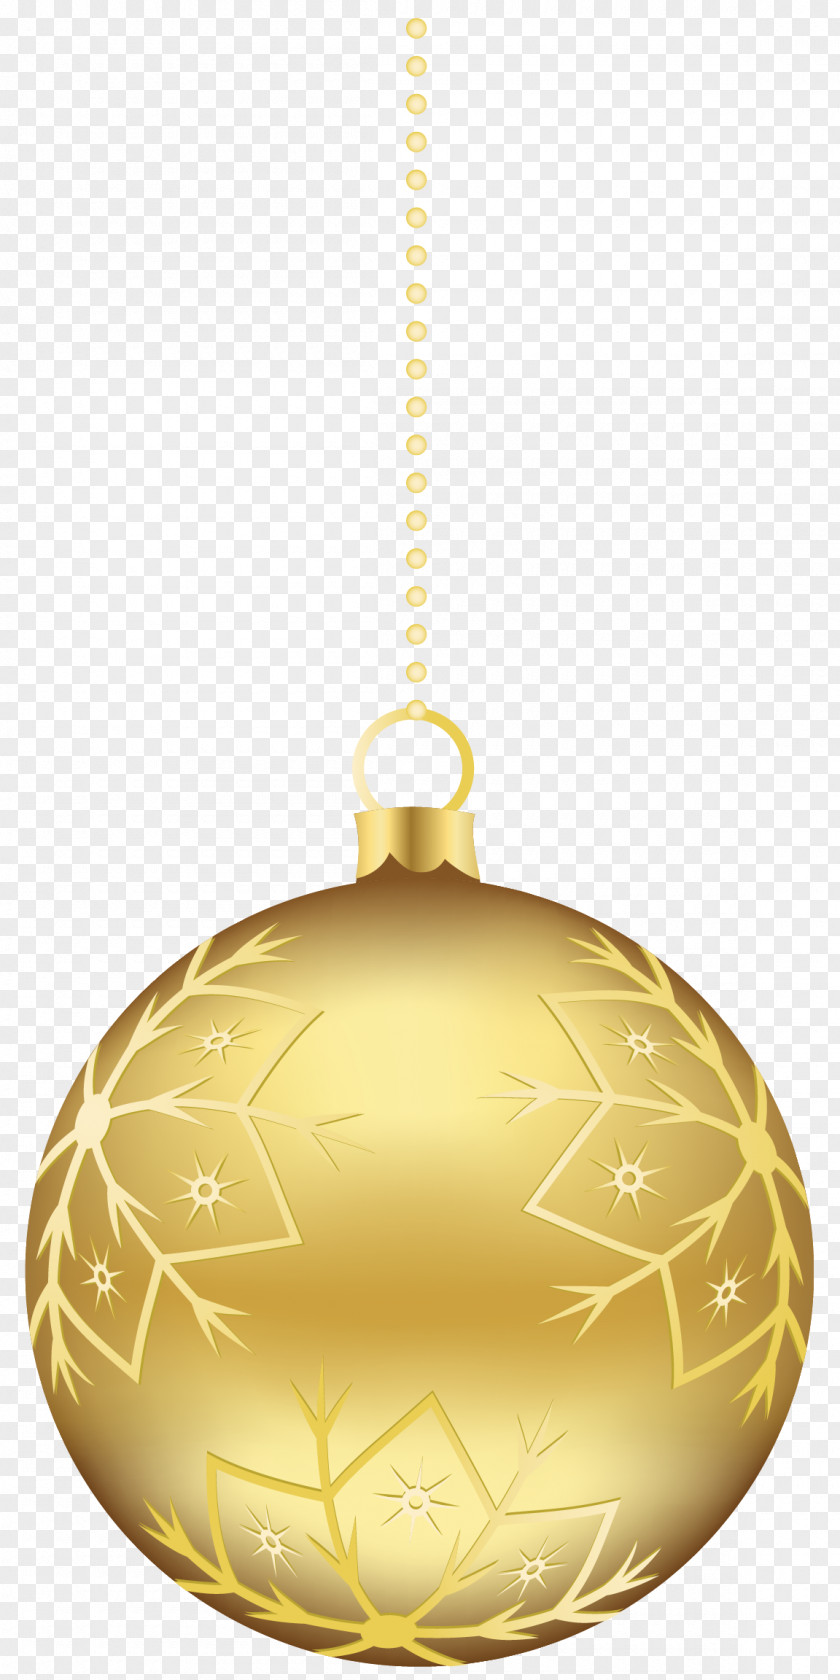 Images Of Gold Ornaments Christmas Ornament Decoration Clip Art PNG